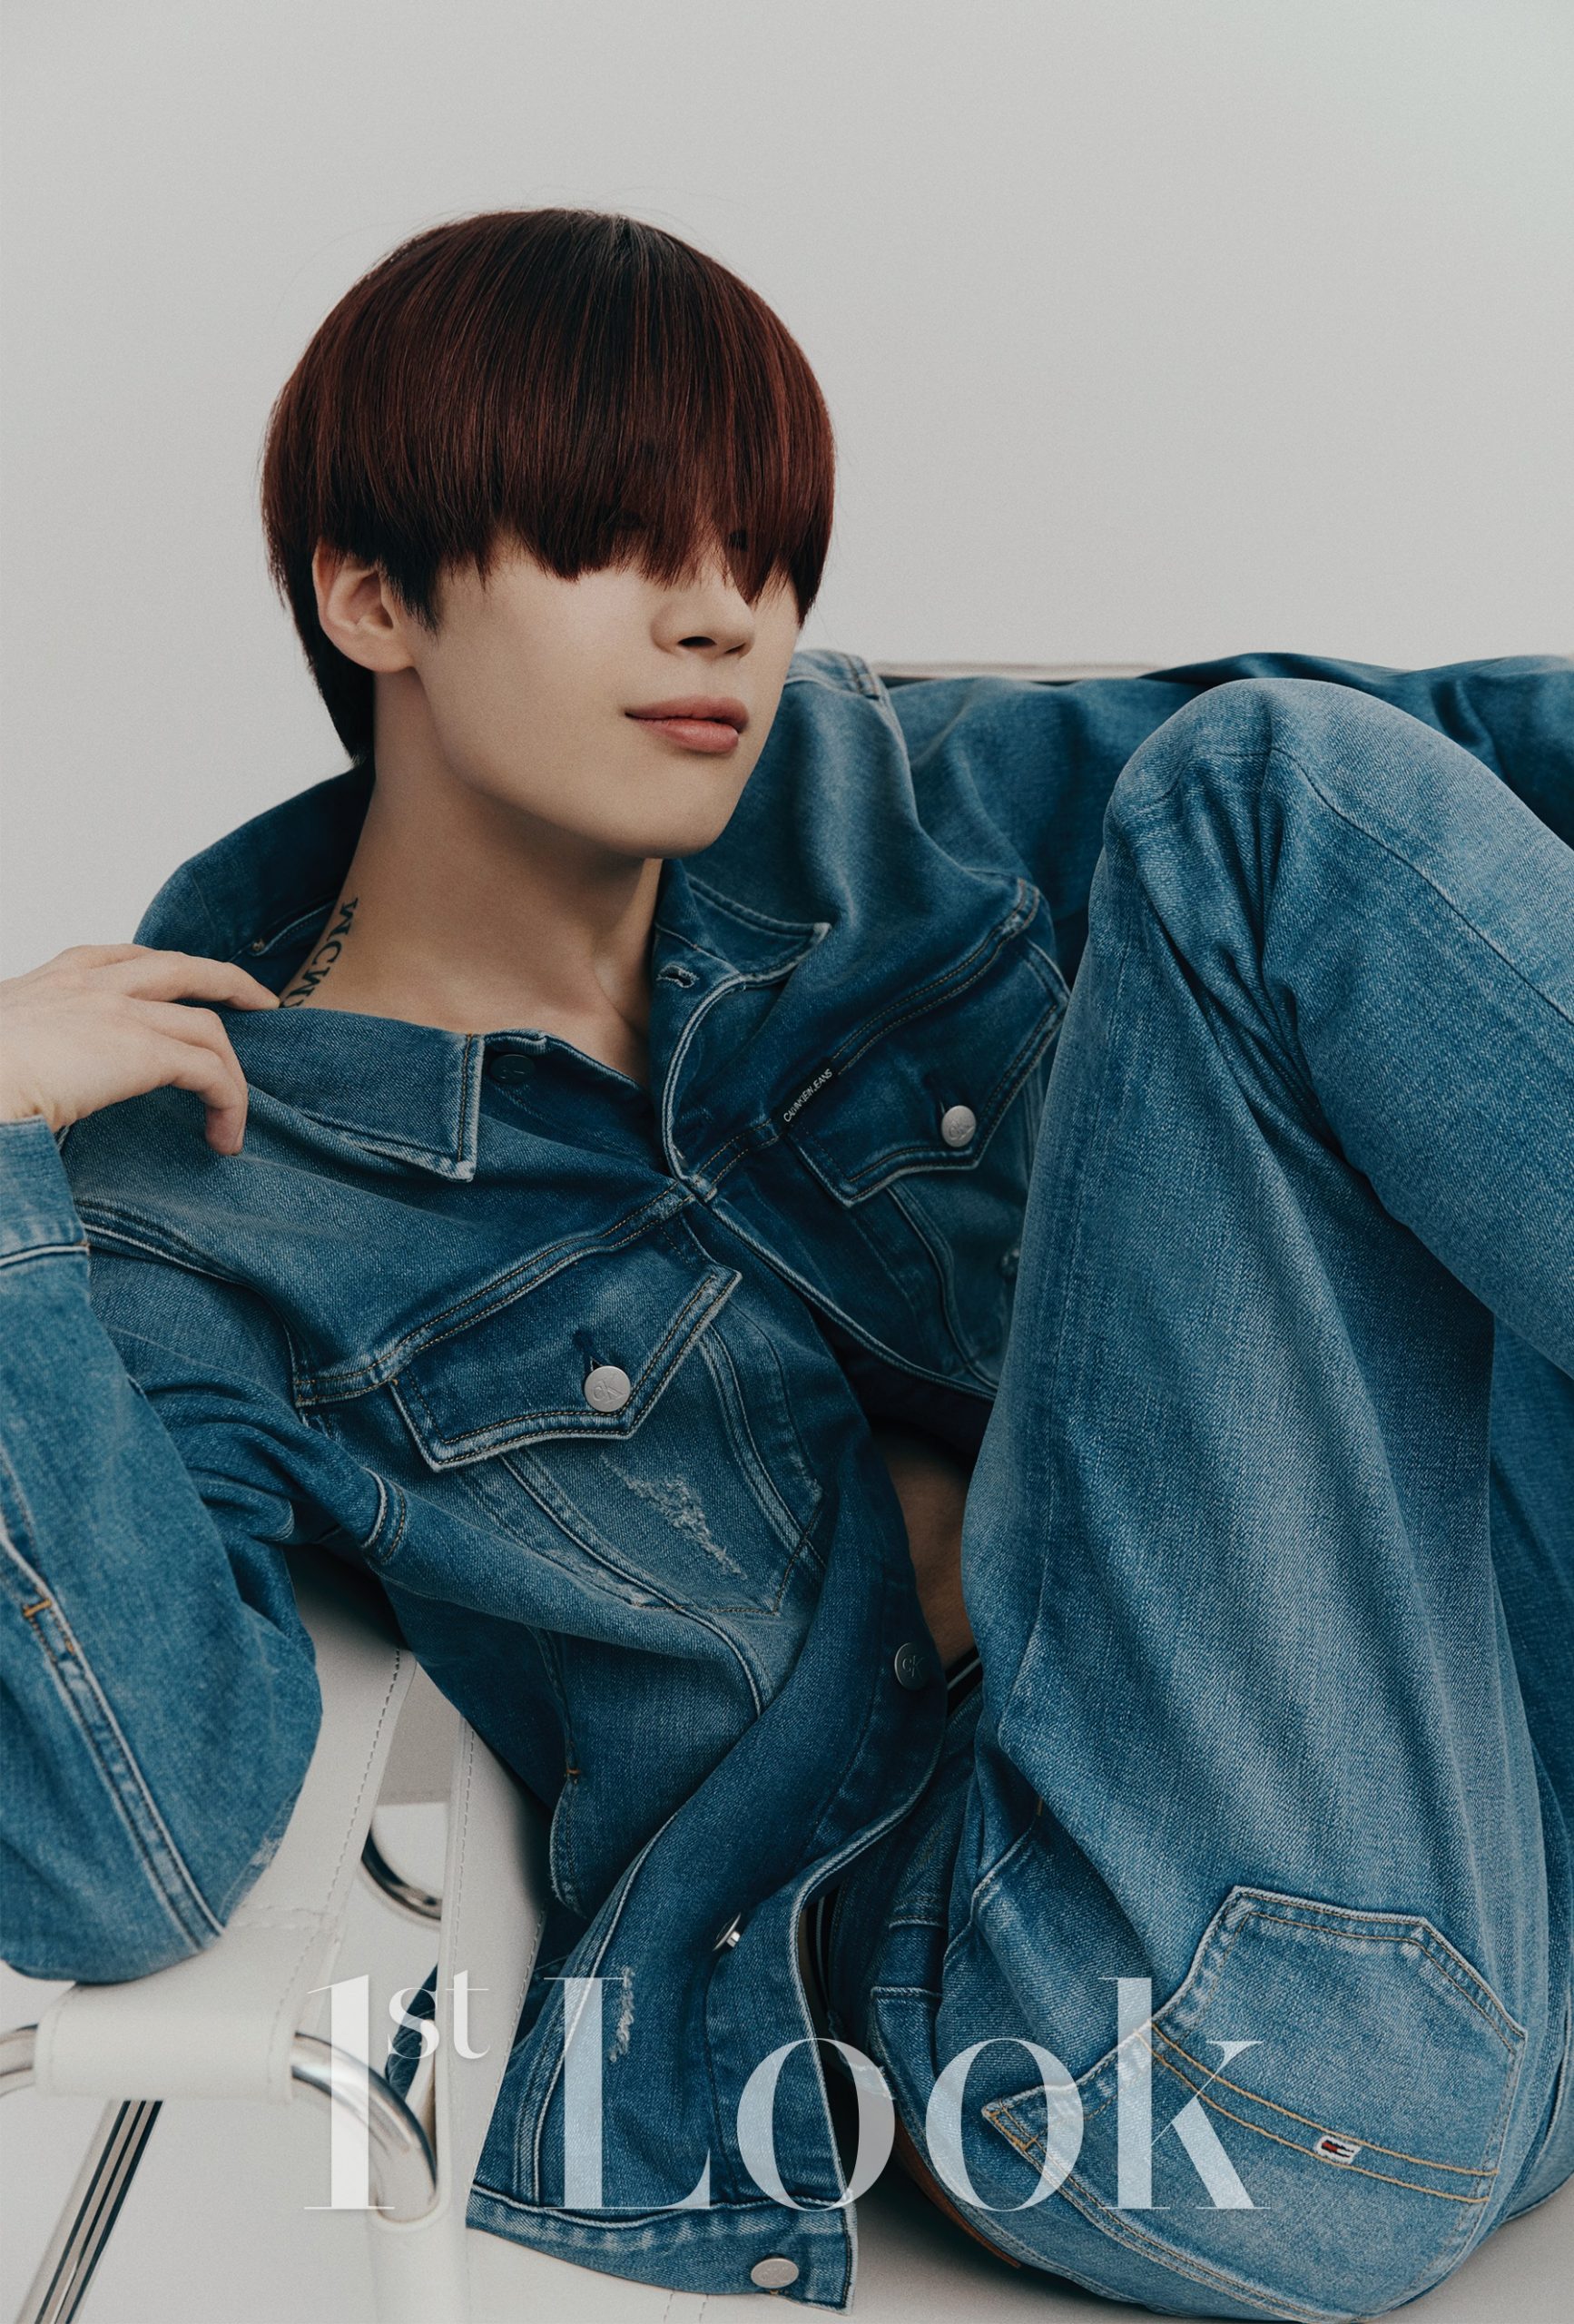 victon-han-seungwoo-reveals-perfect-abs-in-new-1st-look-magazine-photoshoot-8